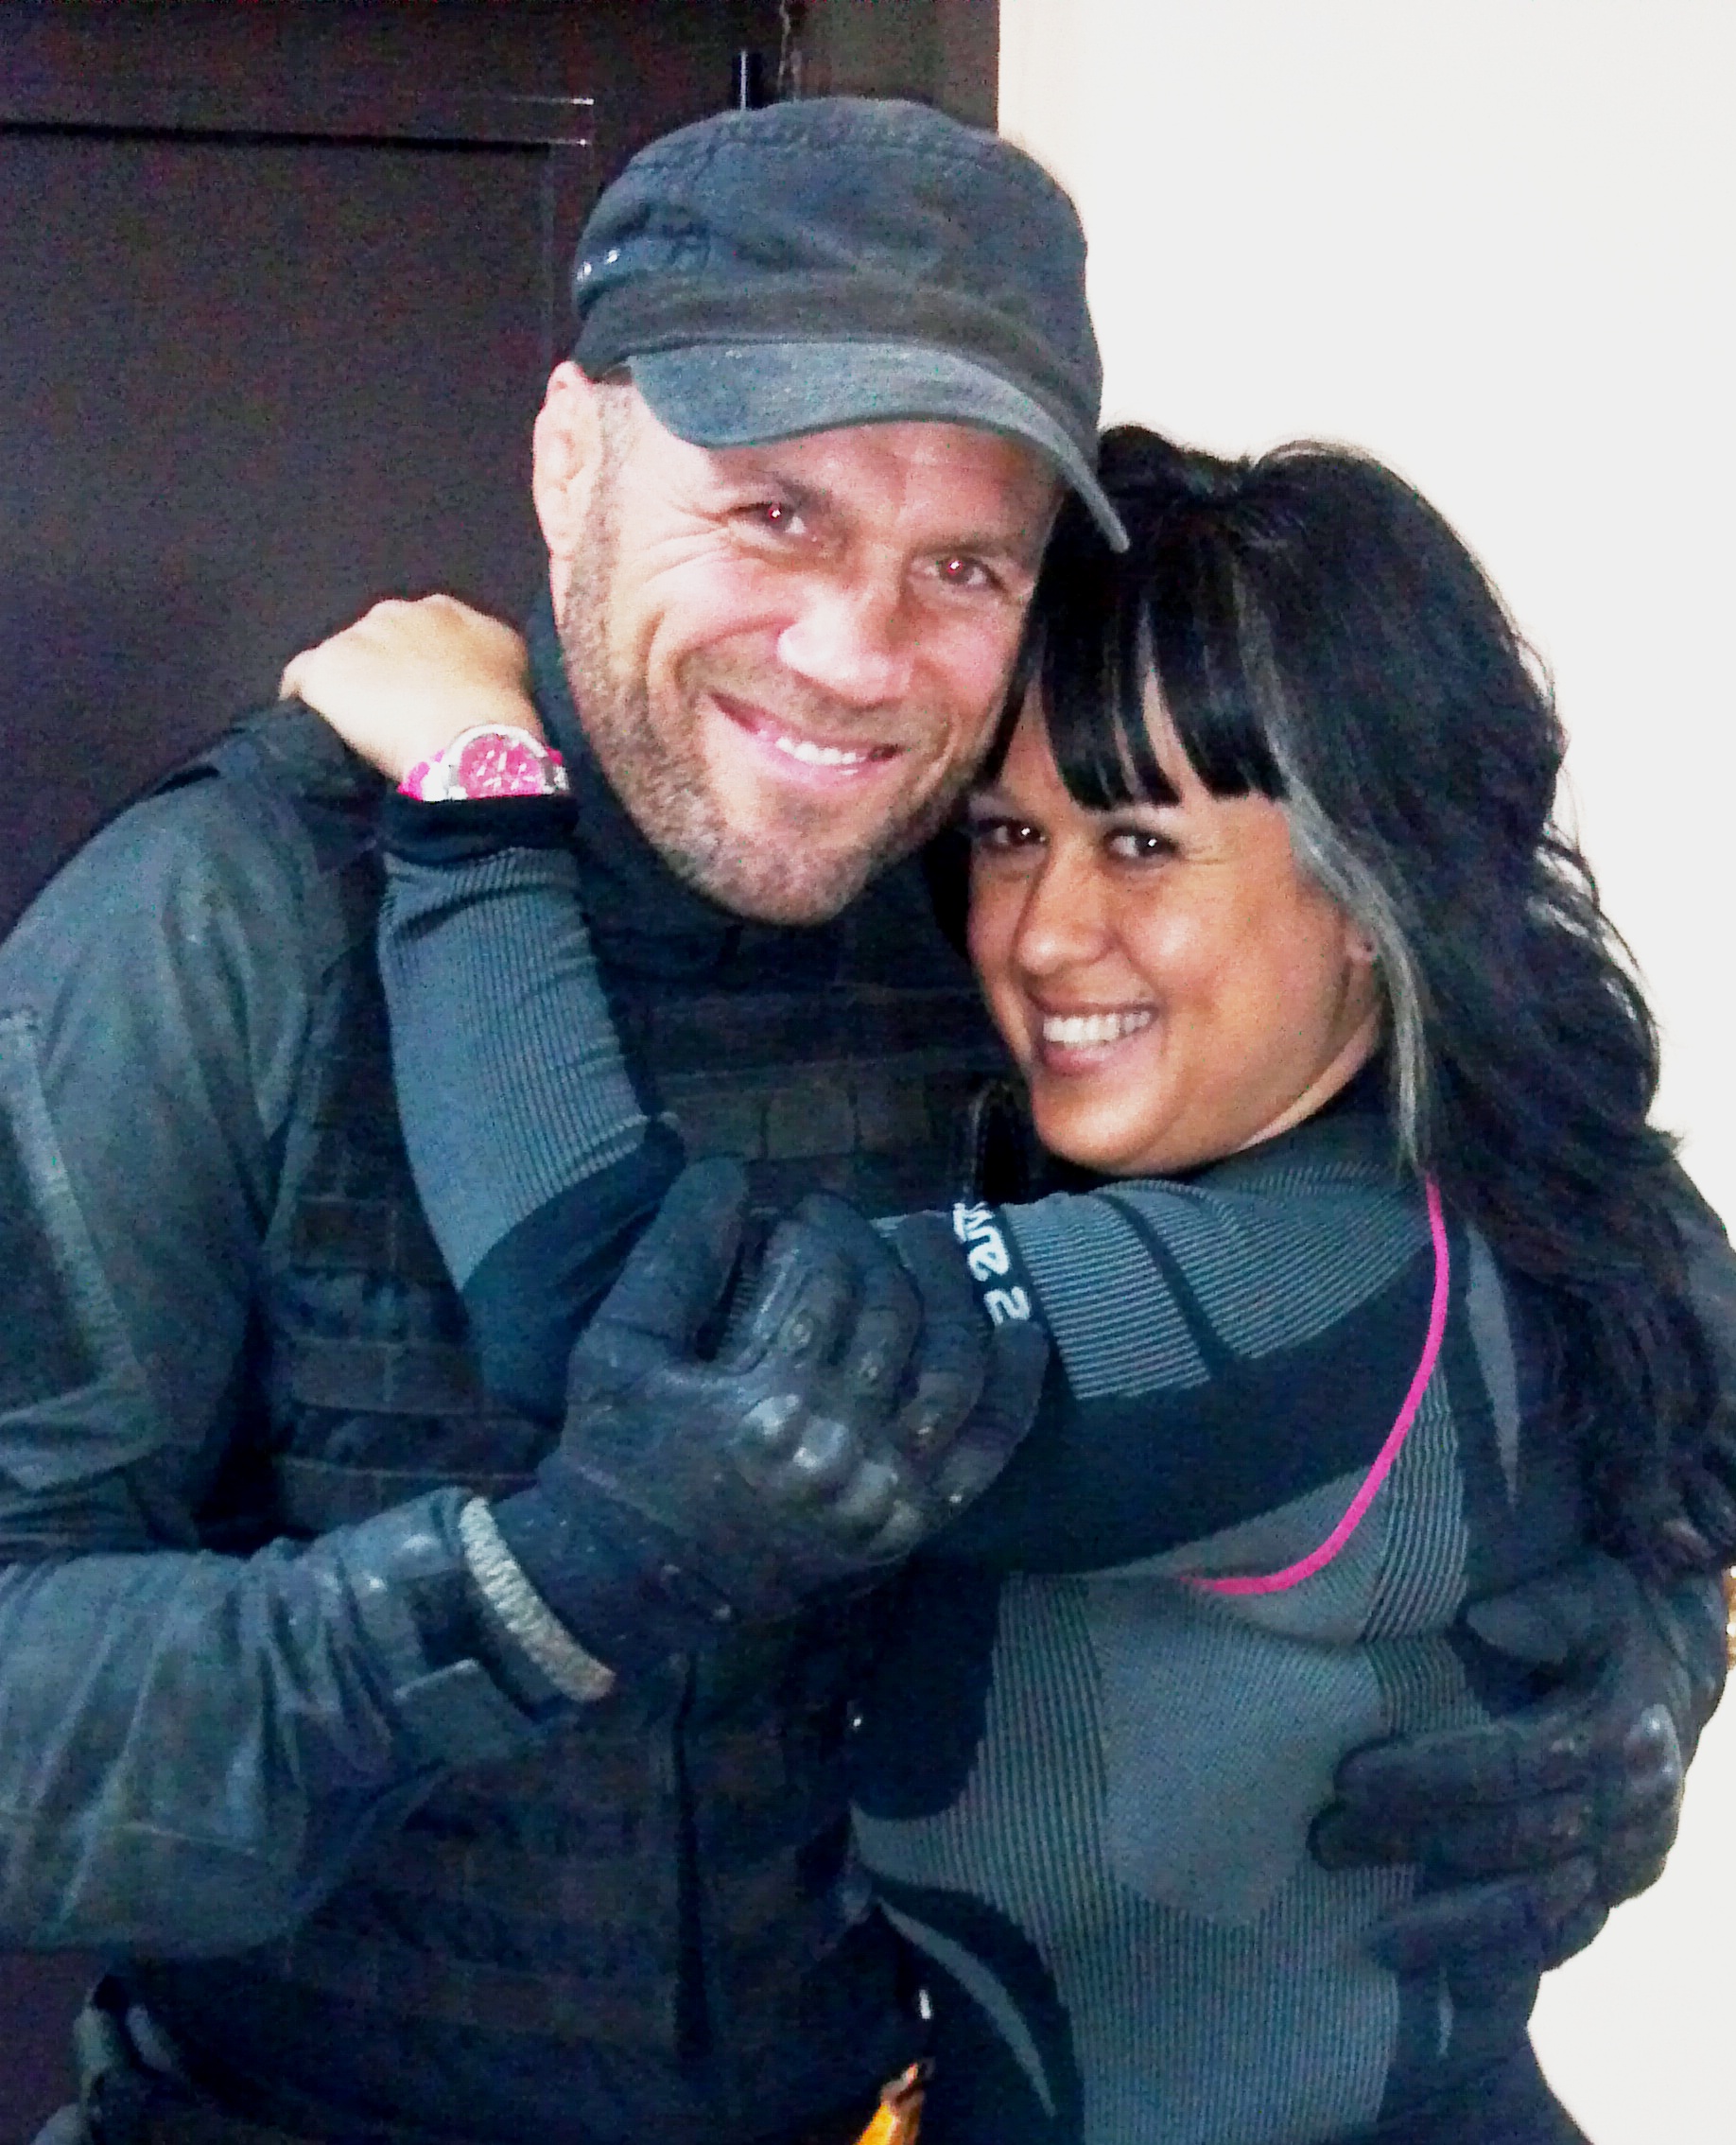 Randy Couture The Expendables 2 - Bulgaria